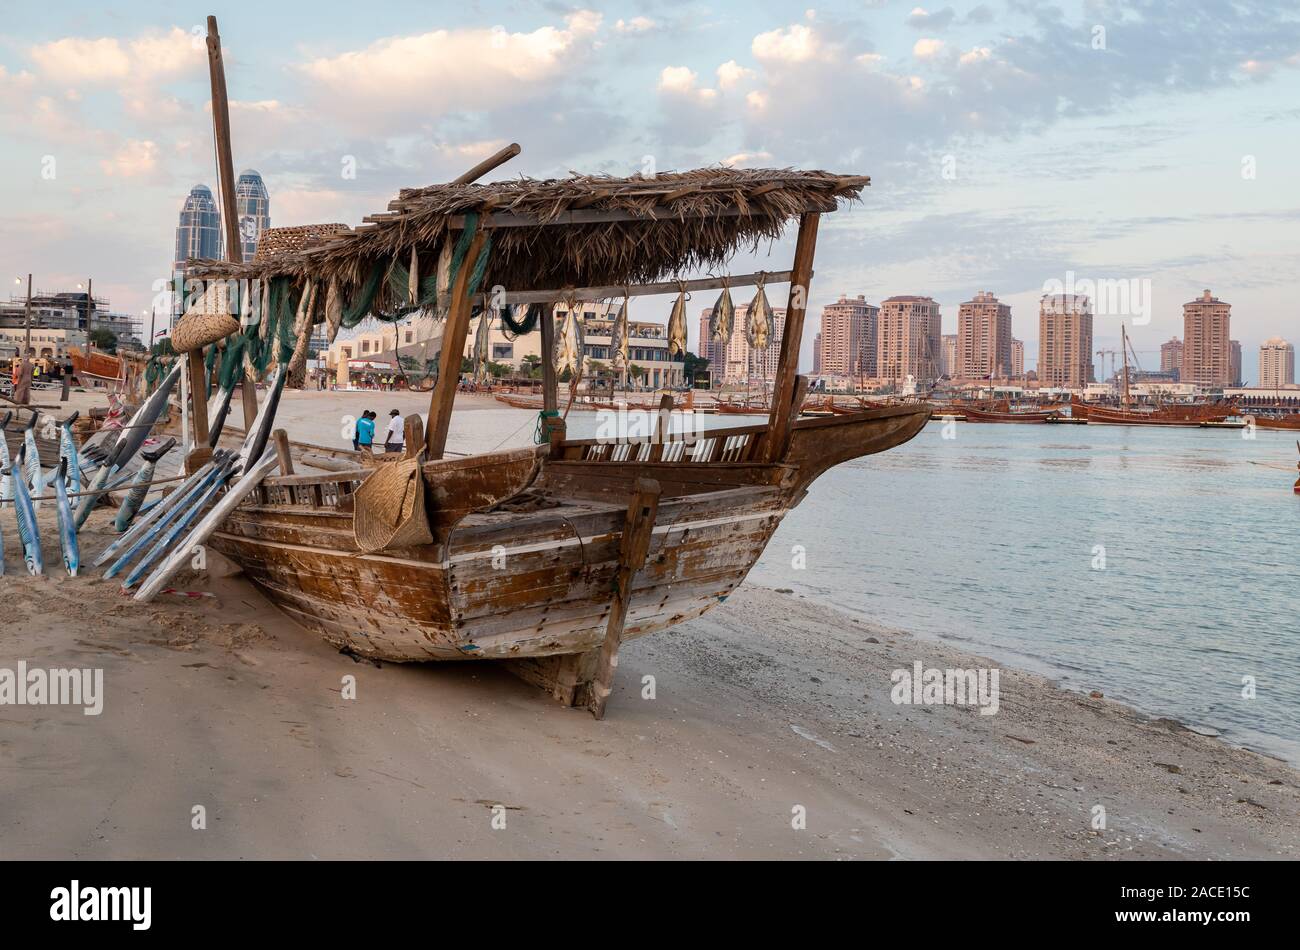 Traditional Dhow Festival in Katara cultural village, Doha, Qatar showing old decorated wooden Arabic boats with clouds in the sky in background Stock Photo